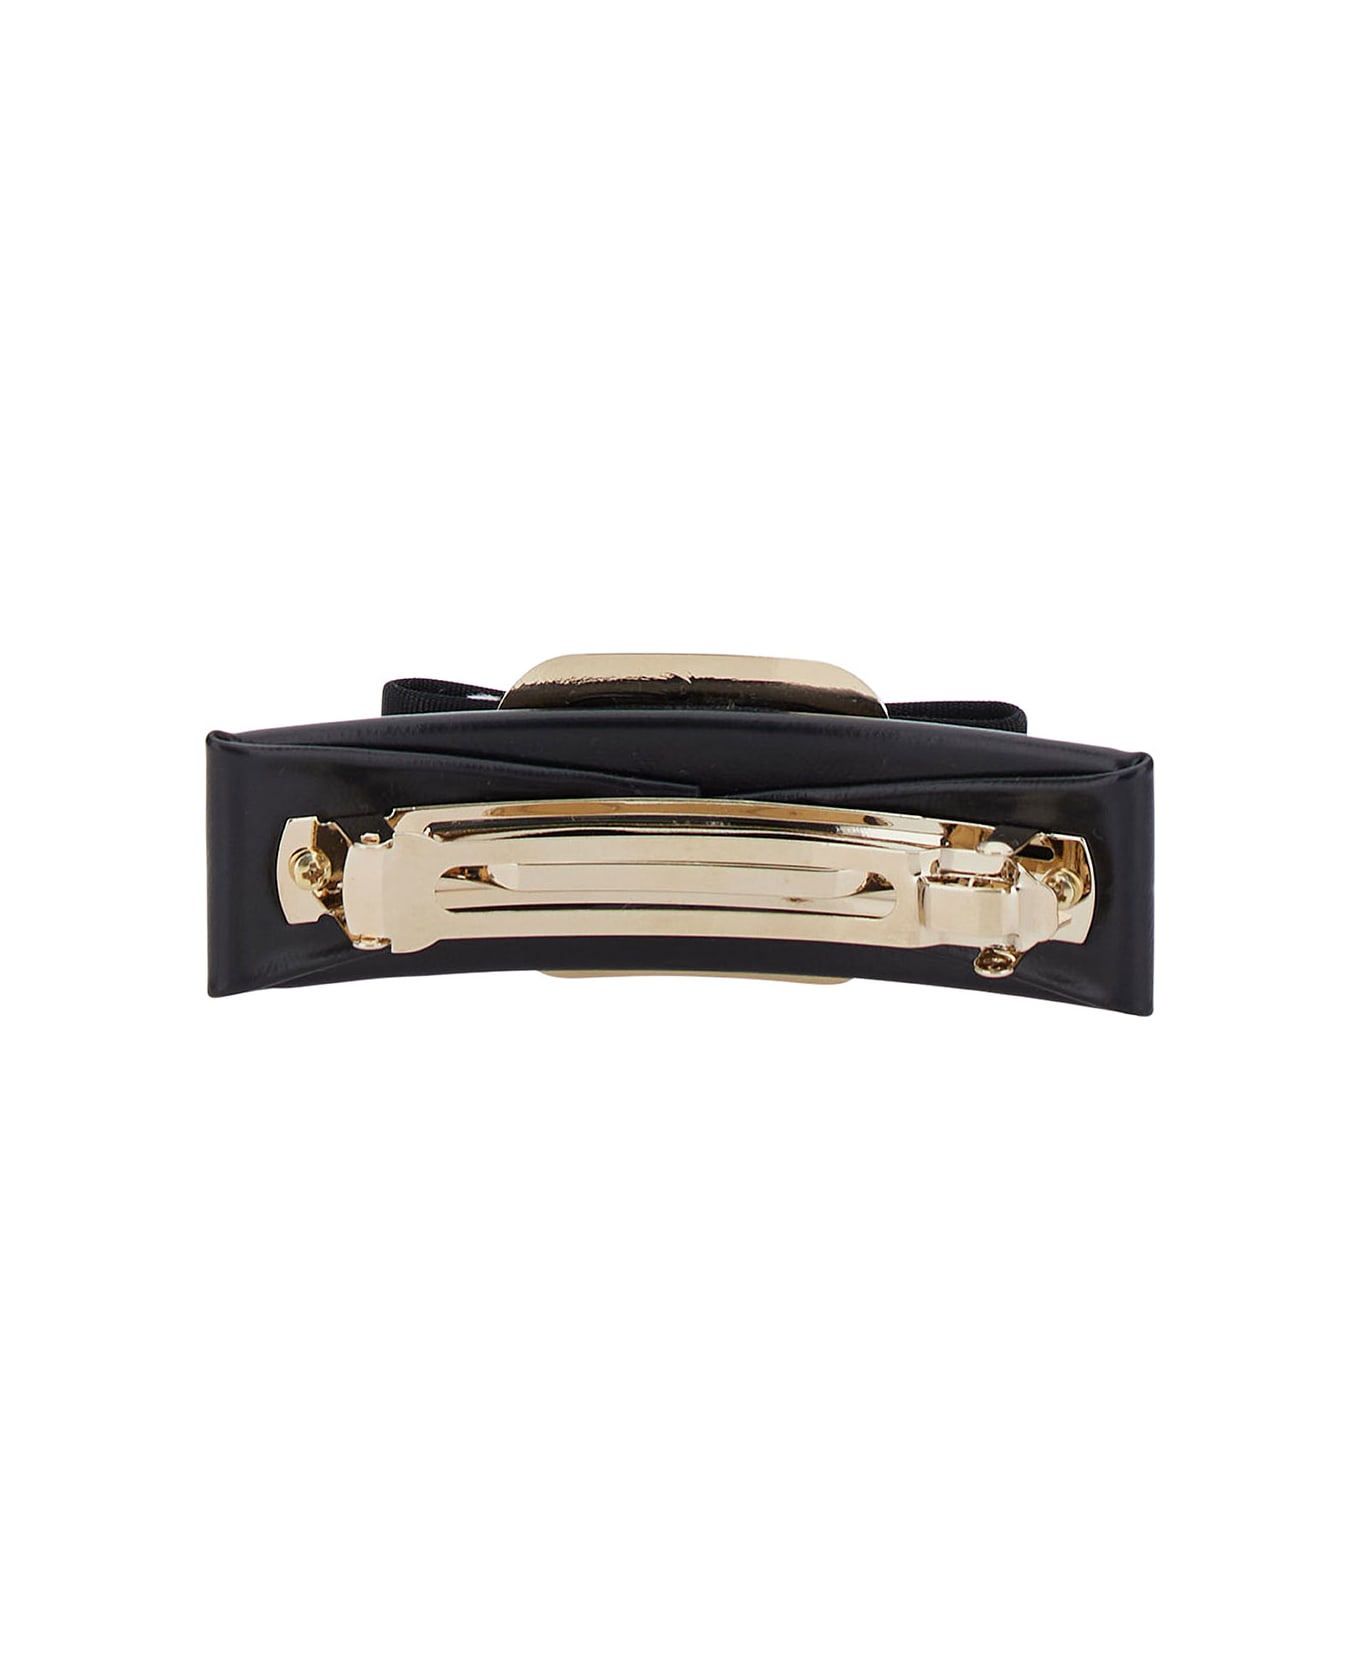 Ferragamo Black Hairclip With Vara Bow In Leather Blend Woman - NERO